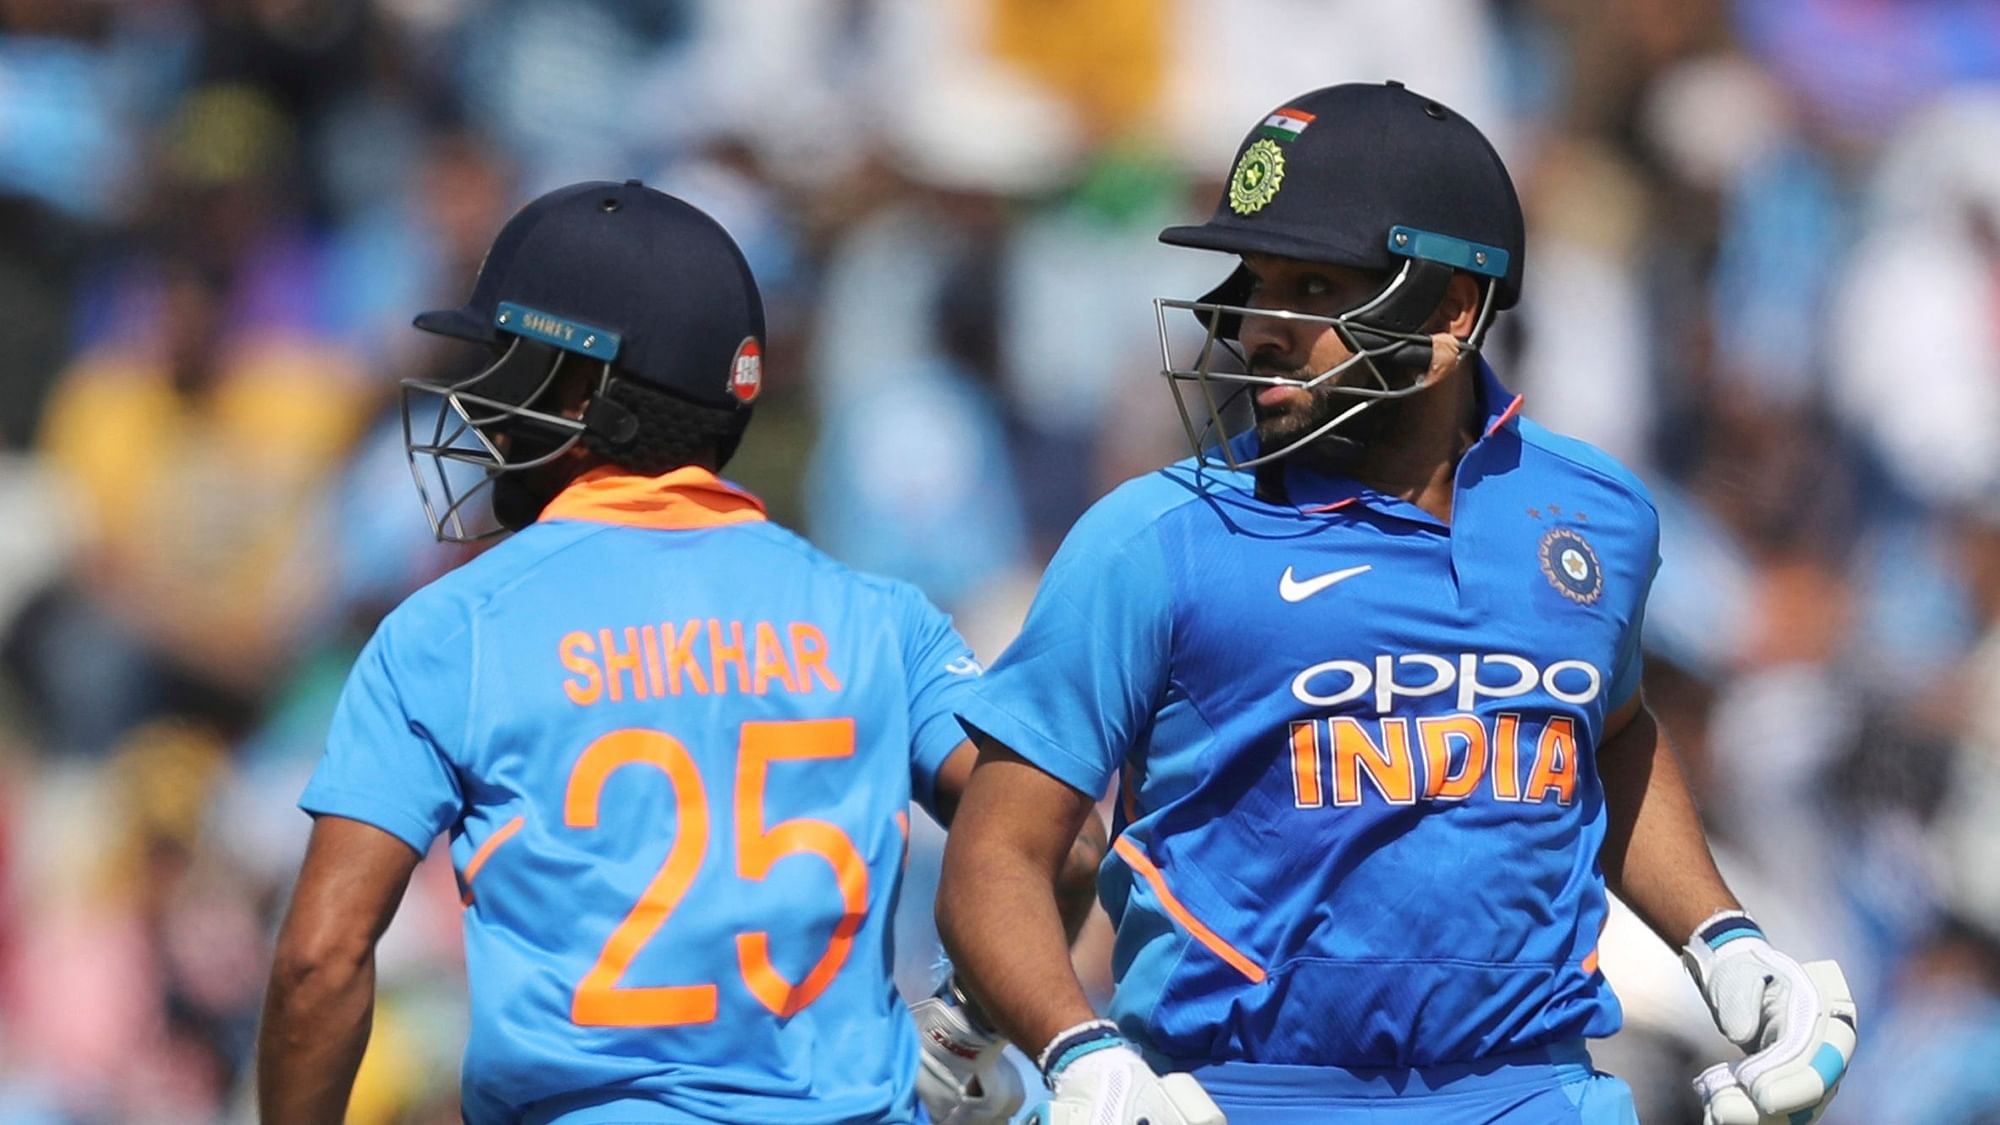 Shikhar Dhawan and Rohit Sharma in action during the fourth ODI between India and Australia at Mohali.